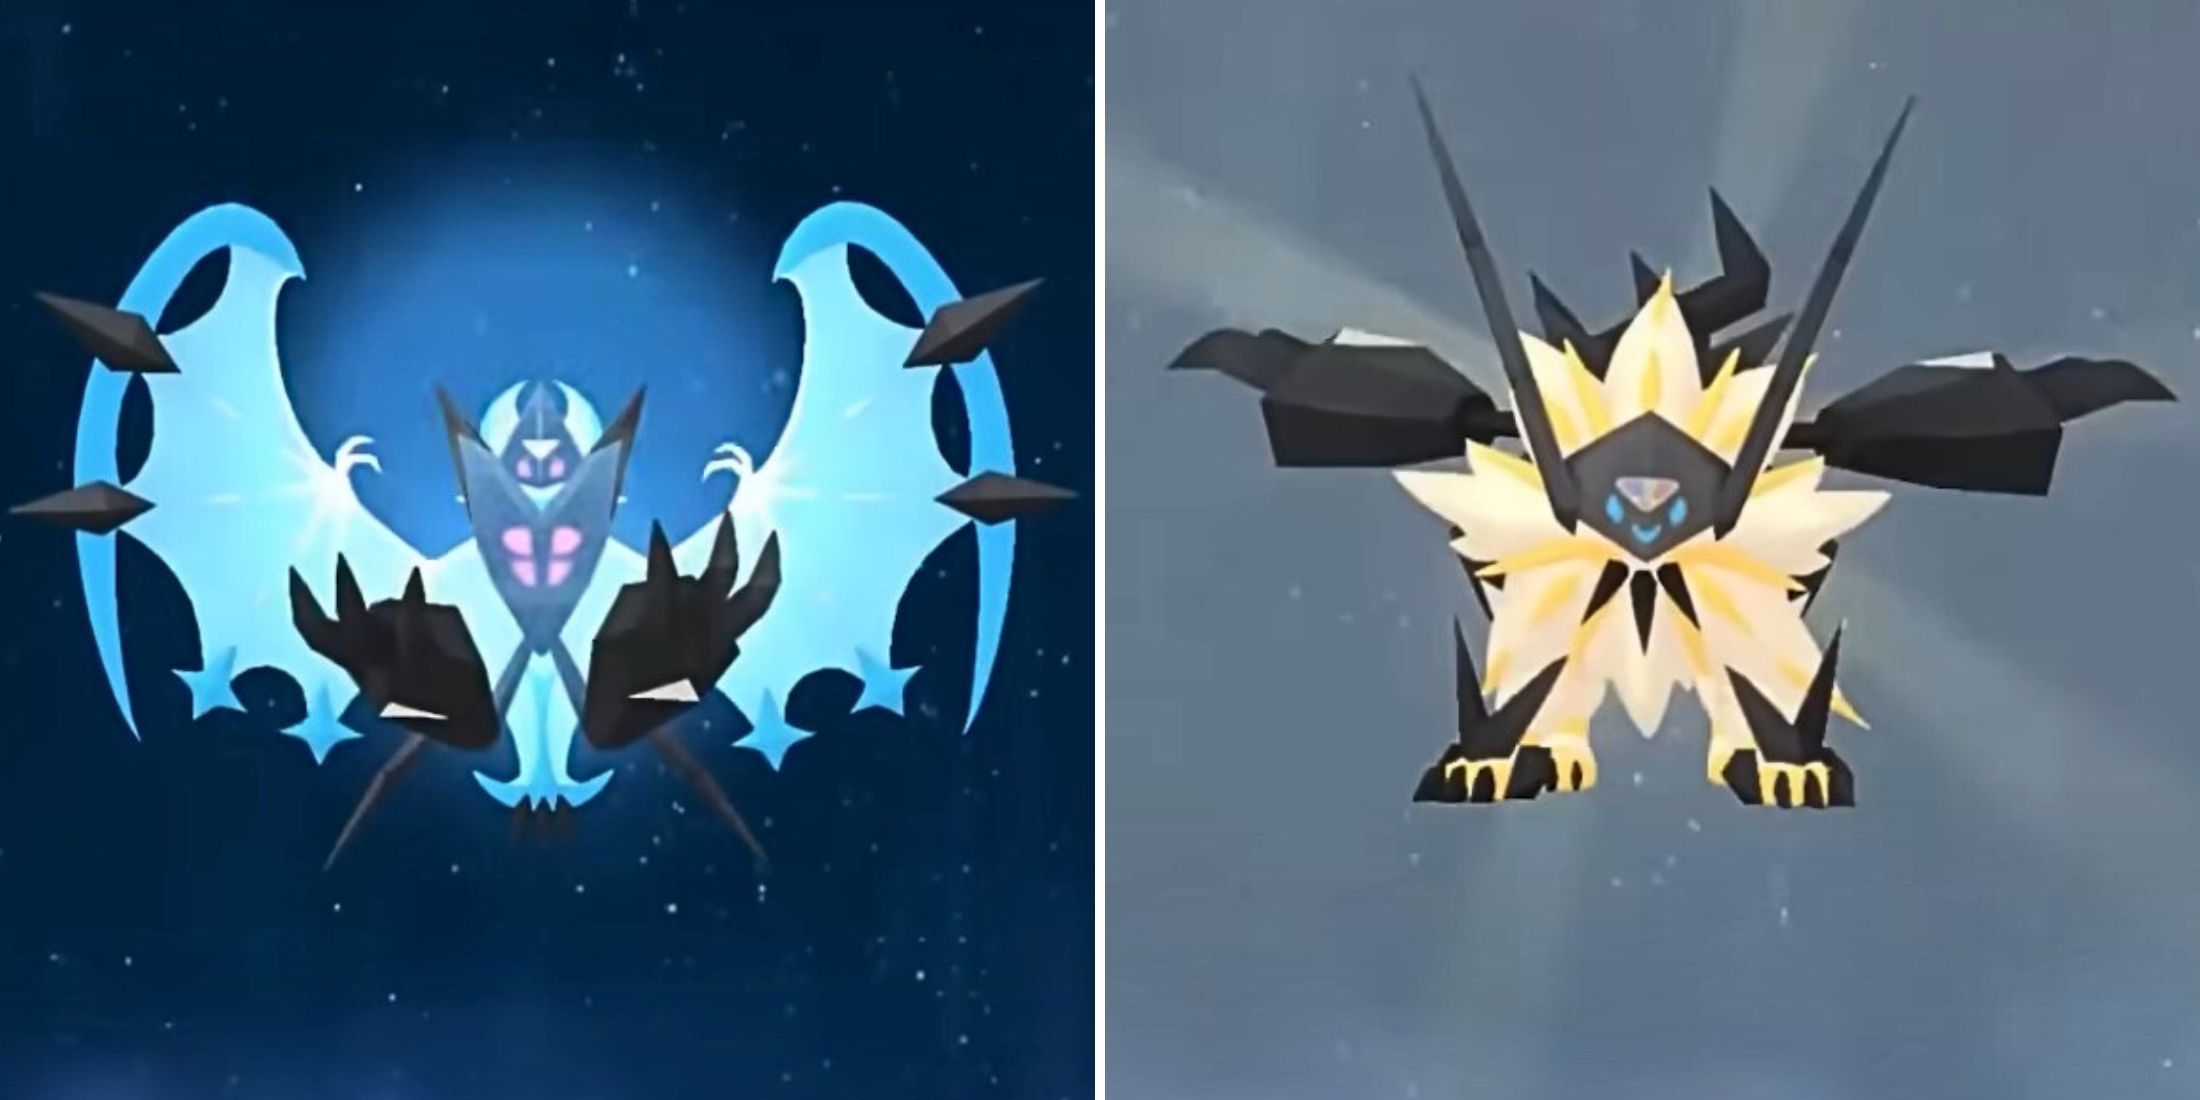 The Pokemon GO character decides whether to use Solar or Lunar Fusion on Necrozma.